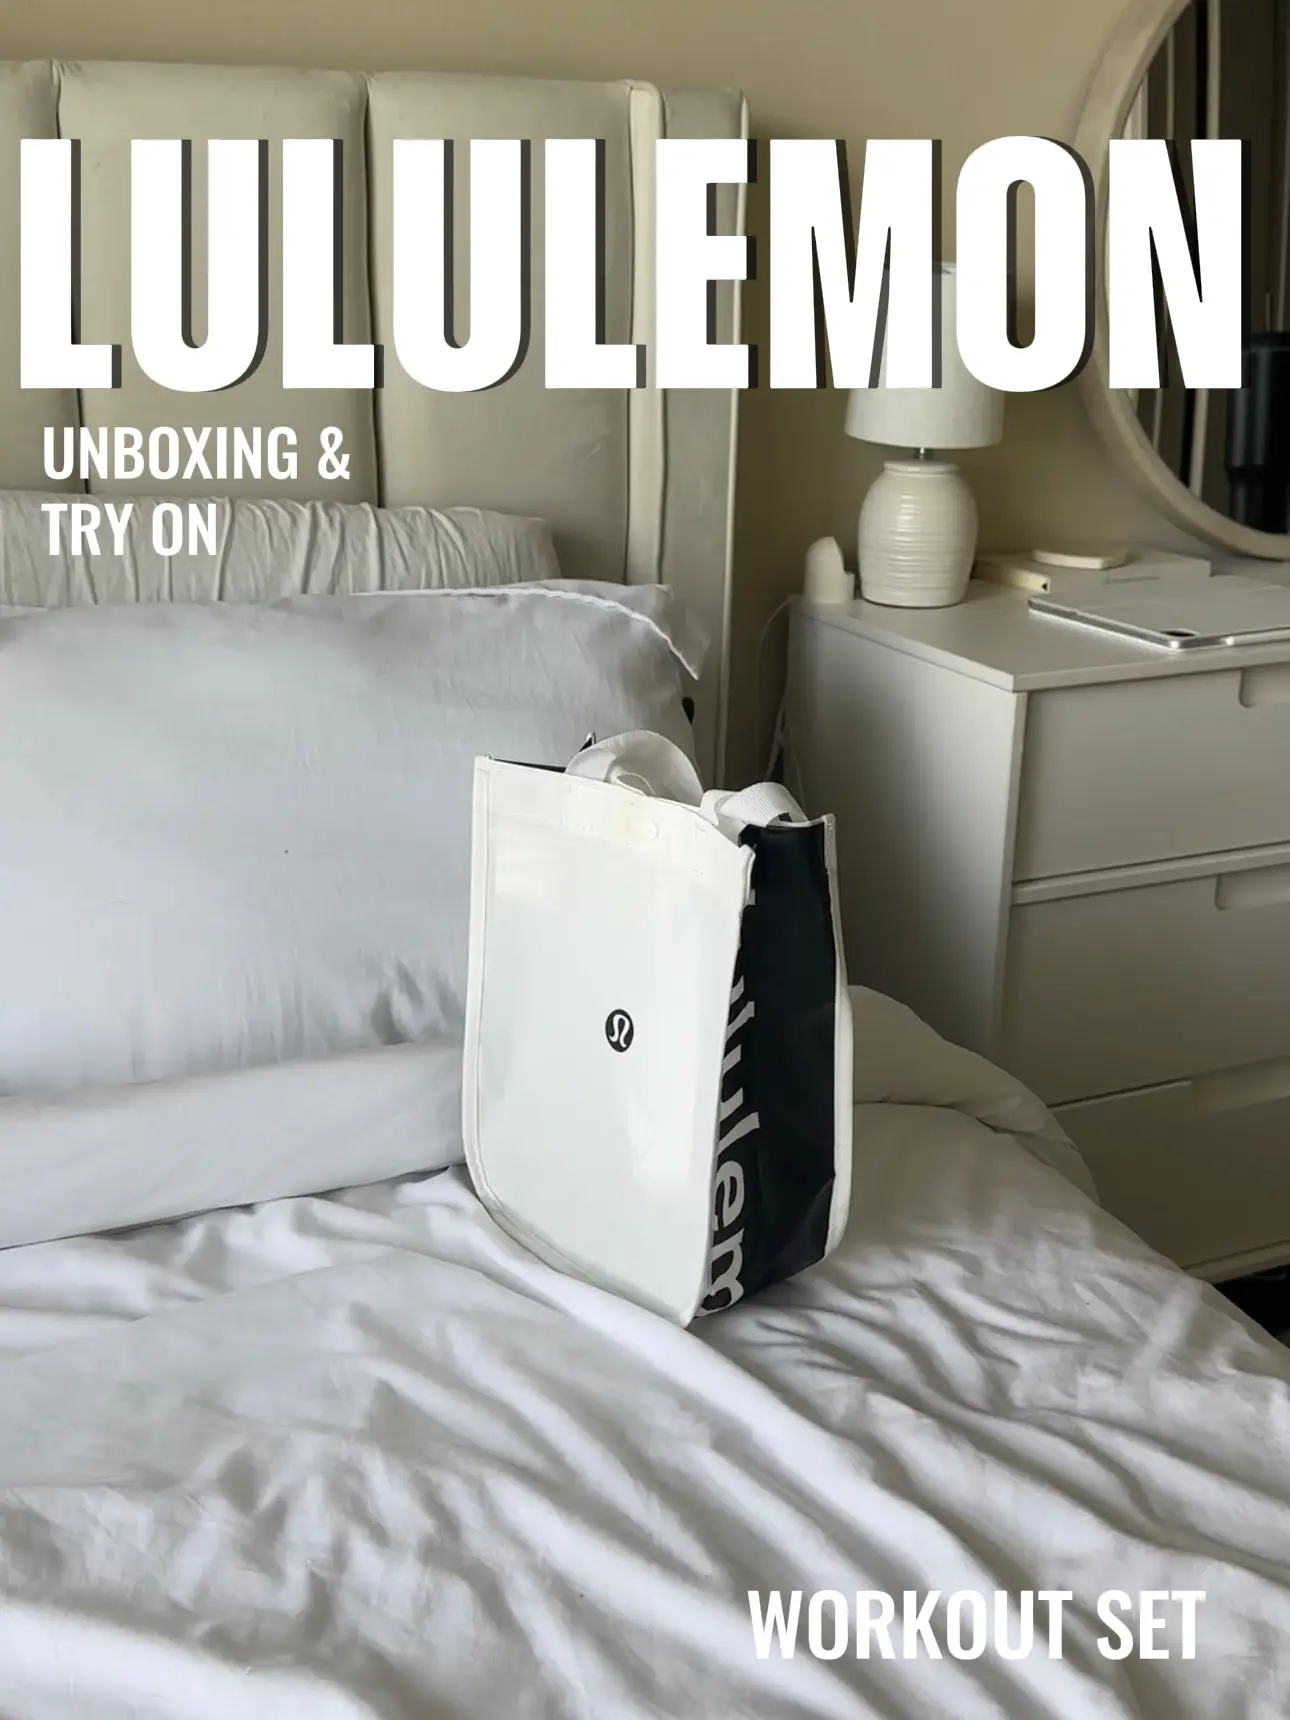 IS LULULEMON WORTH THE MONEY?, Gallery posted by Valerie Escobar